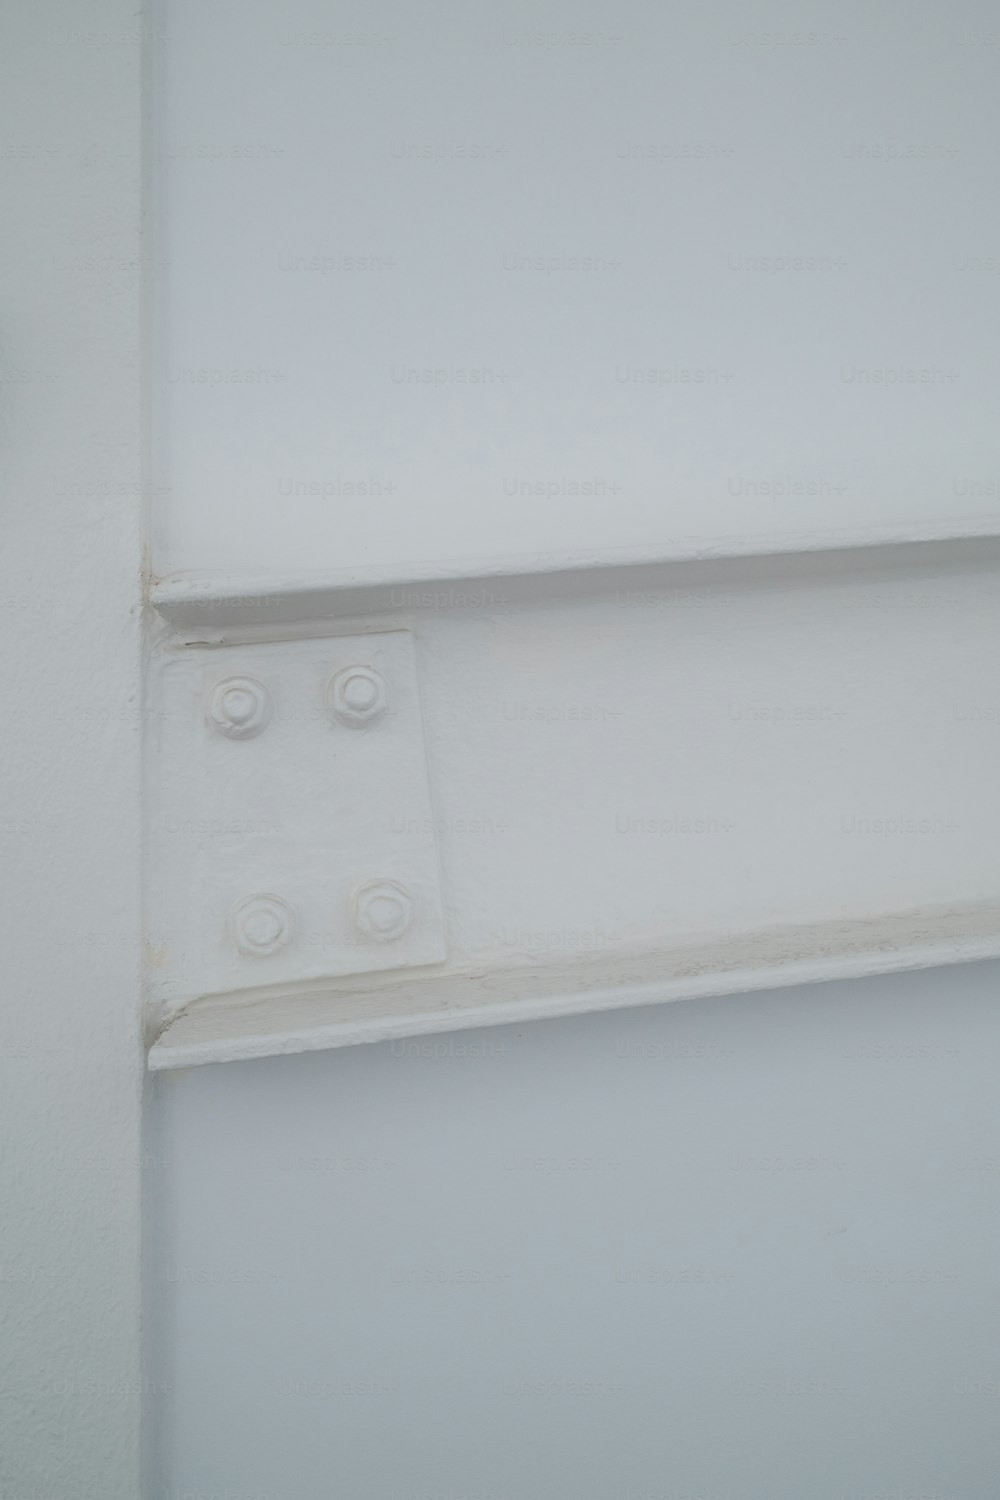 a close up of a light switch on a wall